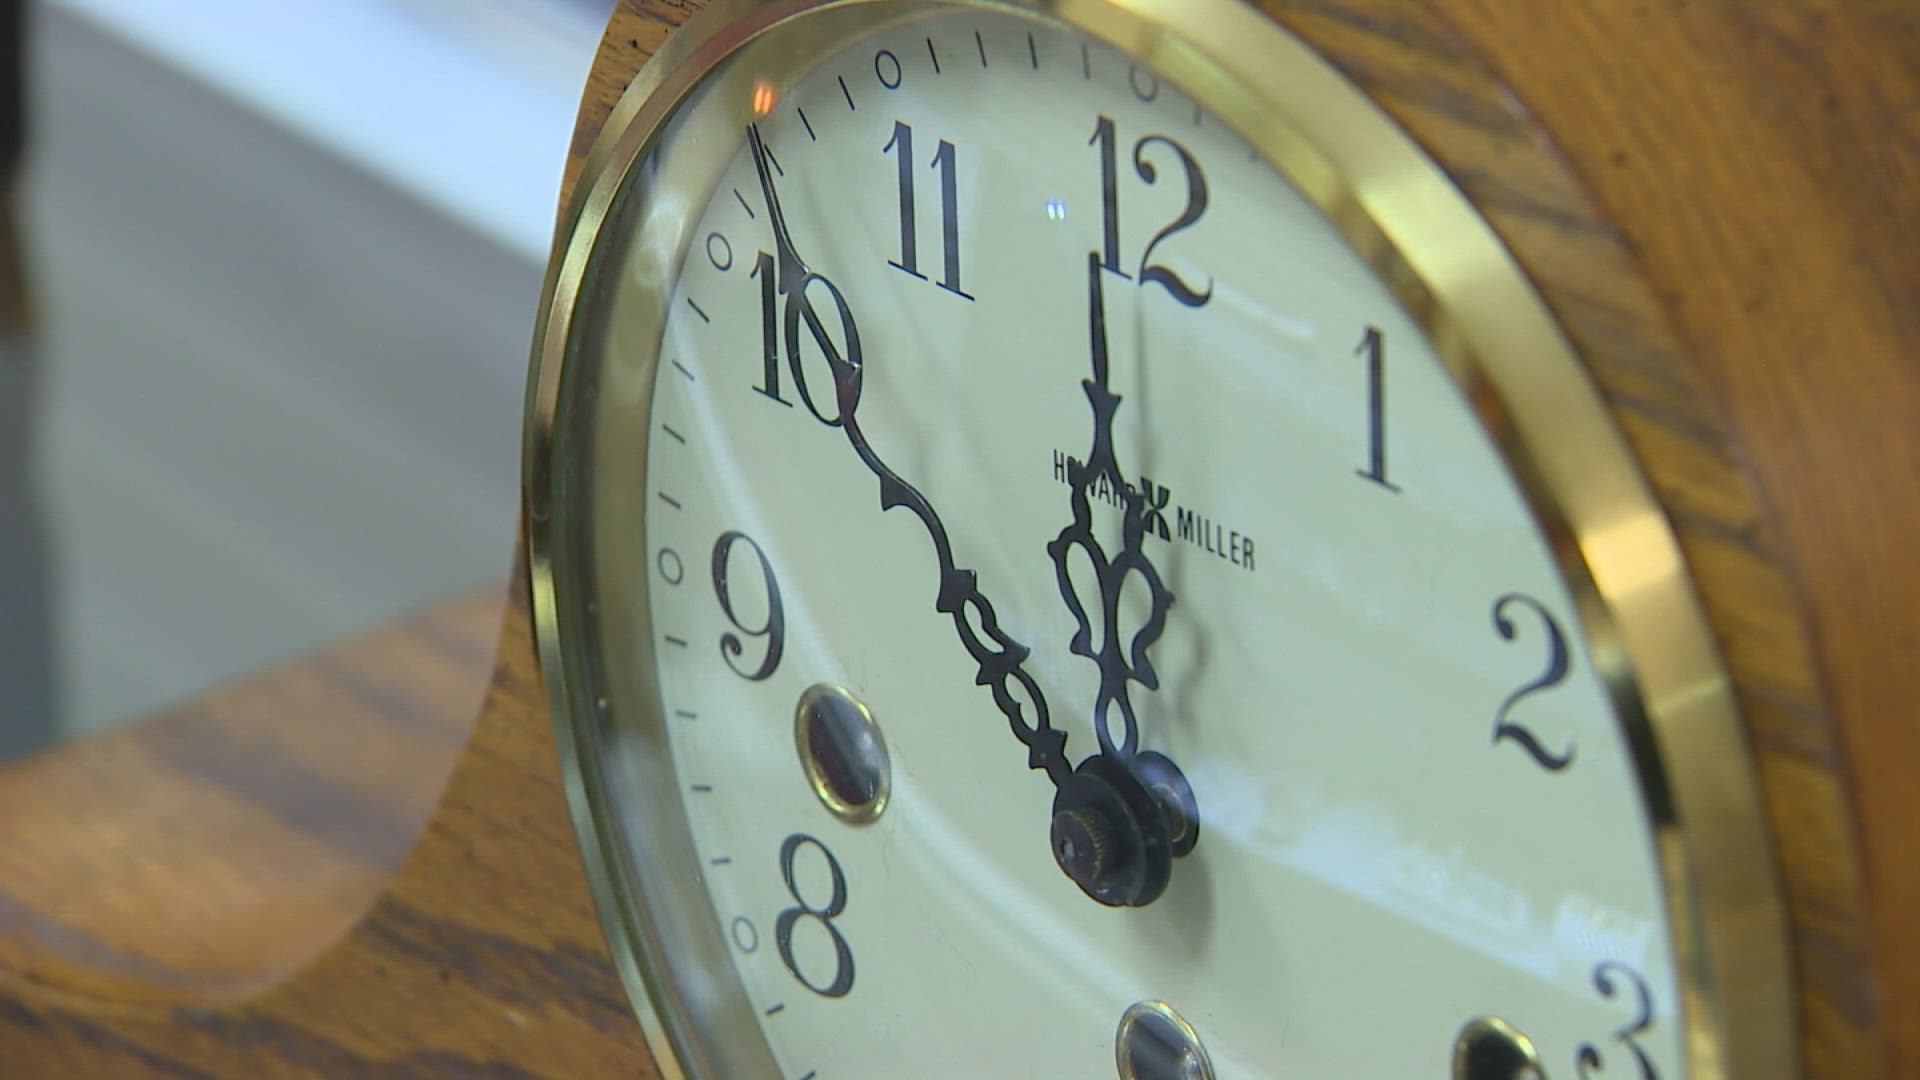 After a fruitless years-long quest for the state to switch to permanent Daylight Saving Time, a new bill suggests a different option.